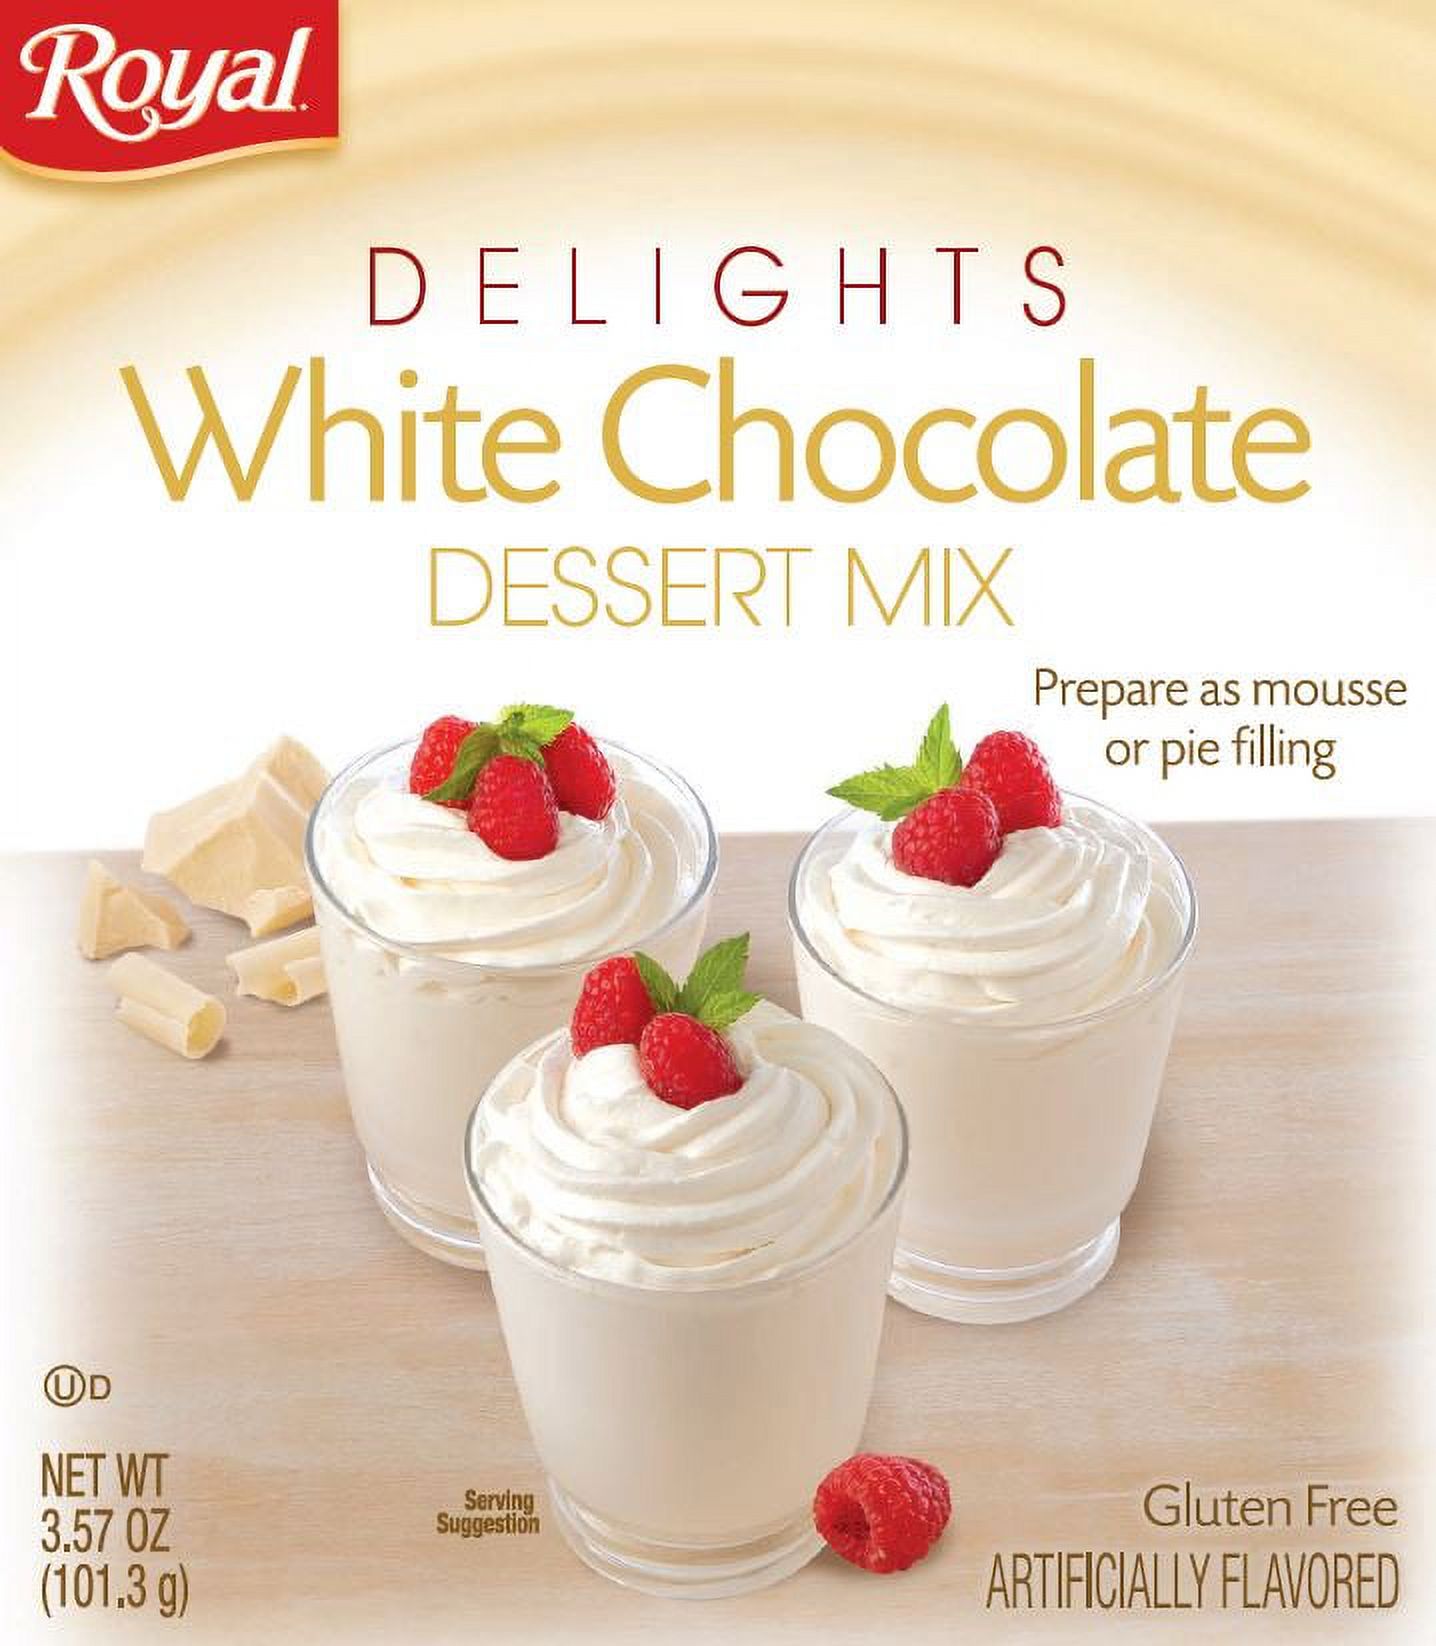 Royal Delights White Chocolate Dessert Mix - image 1 of 6